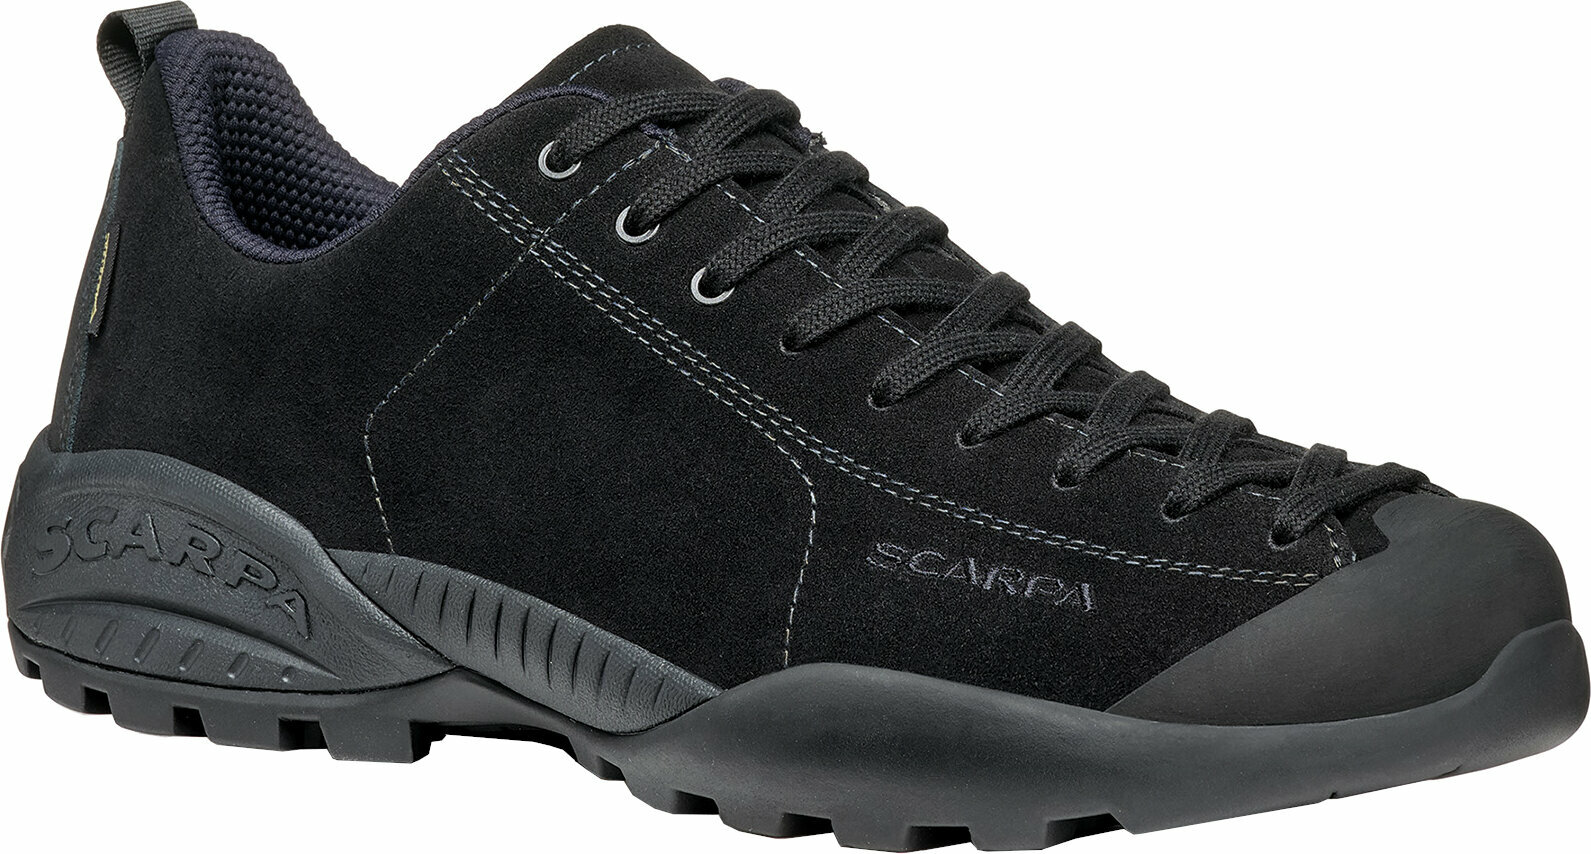 Scarpa Mojito GTX Black 45 Chaussures outdoor hommes male